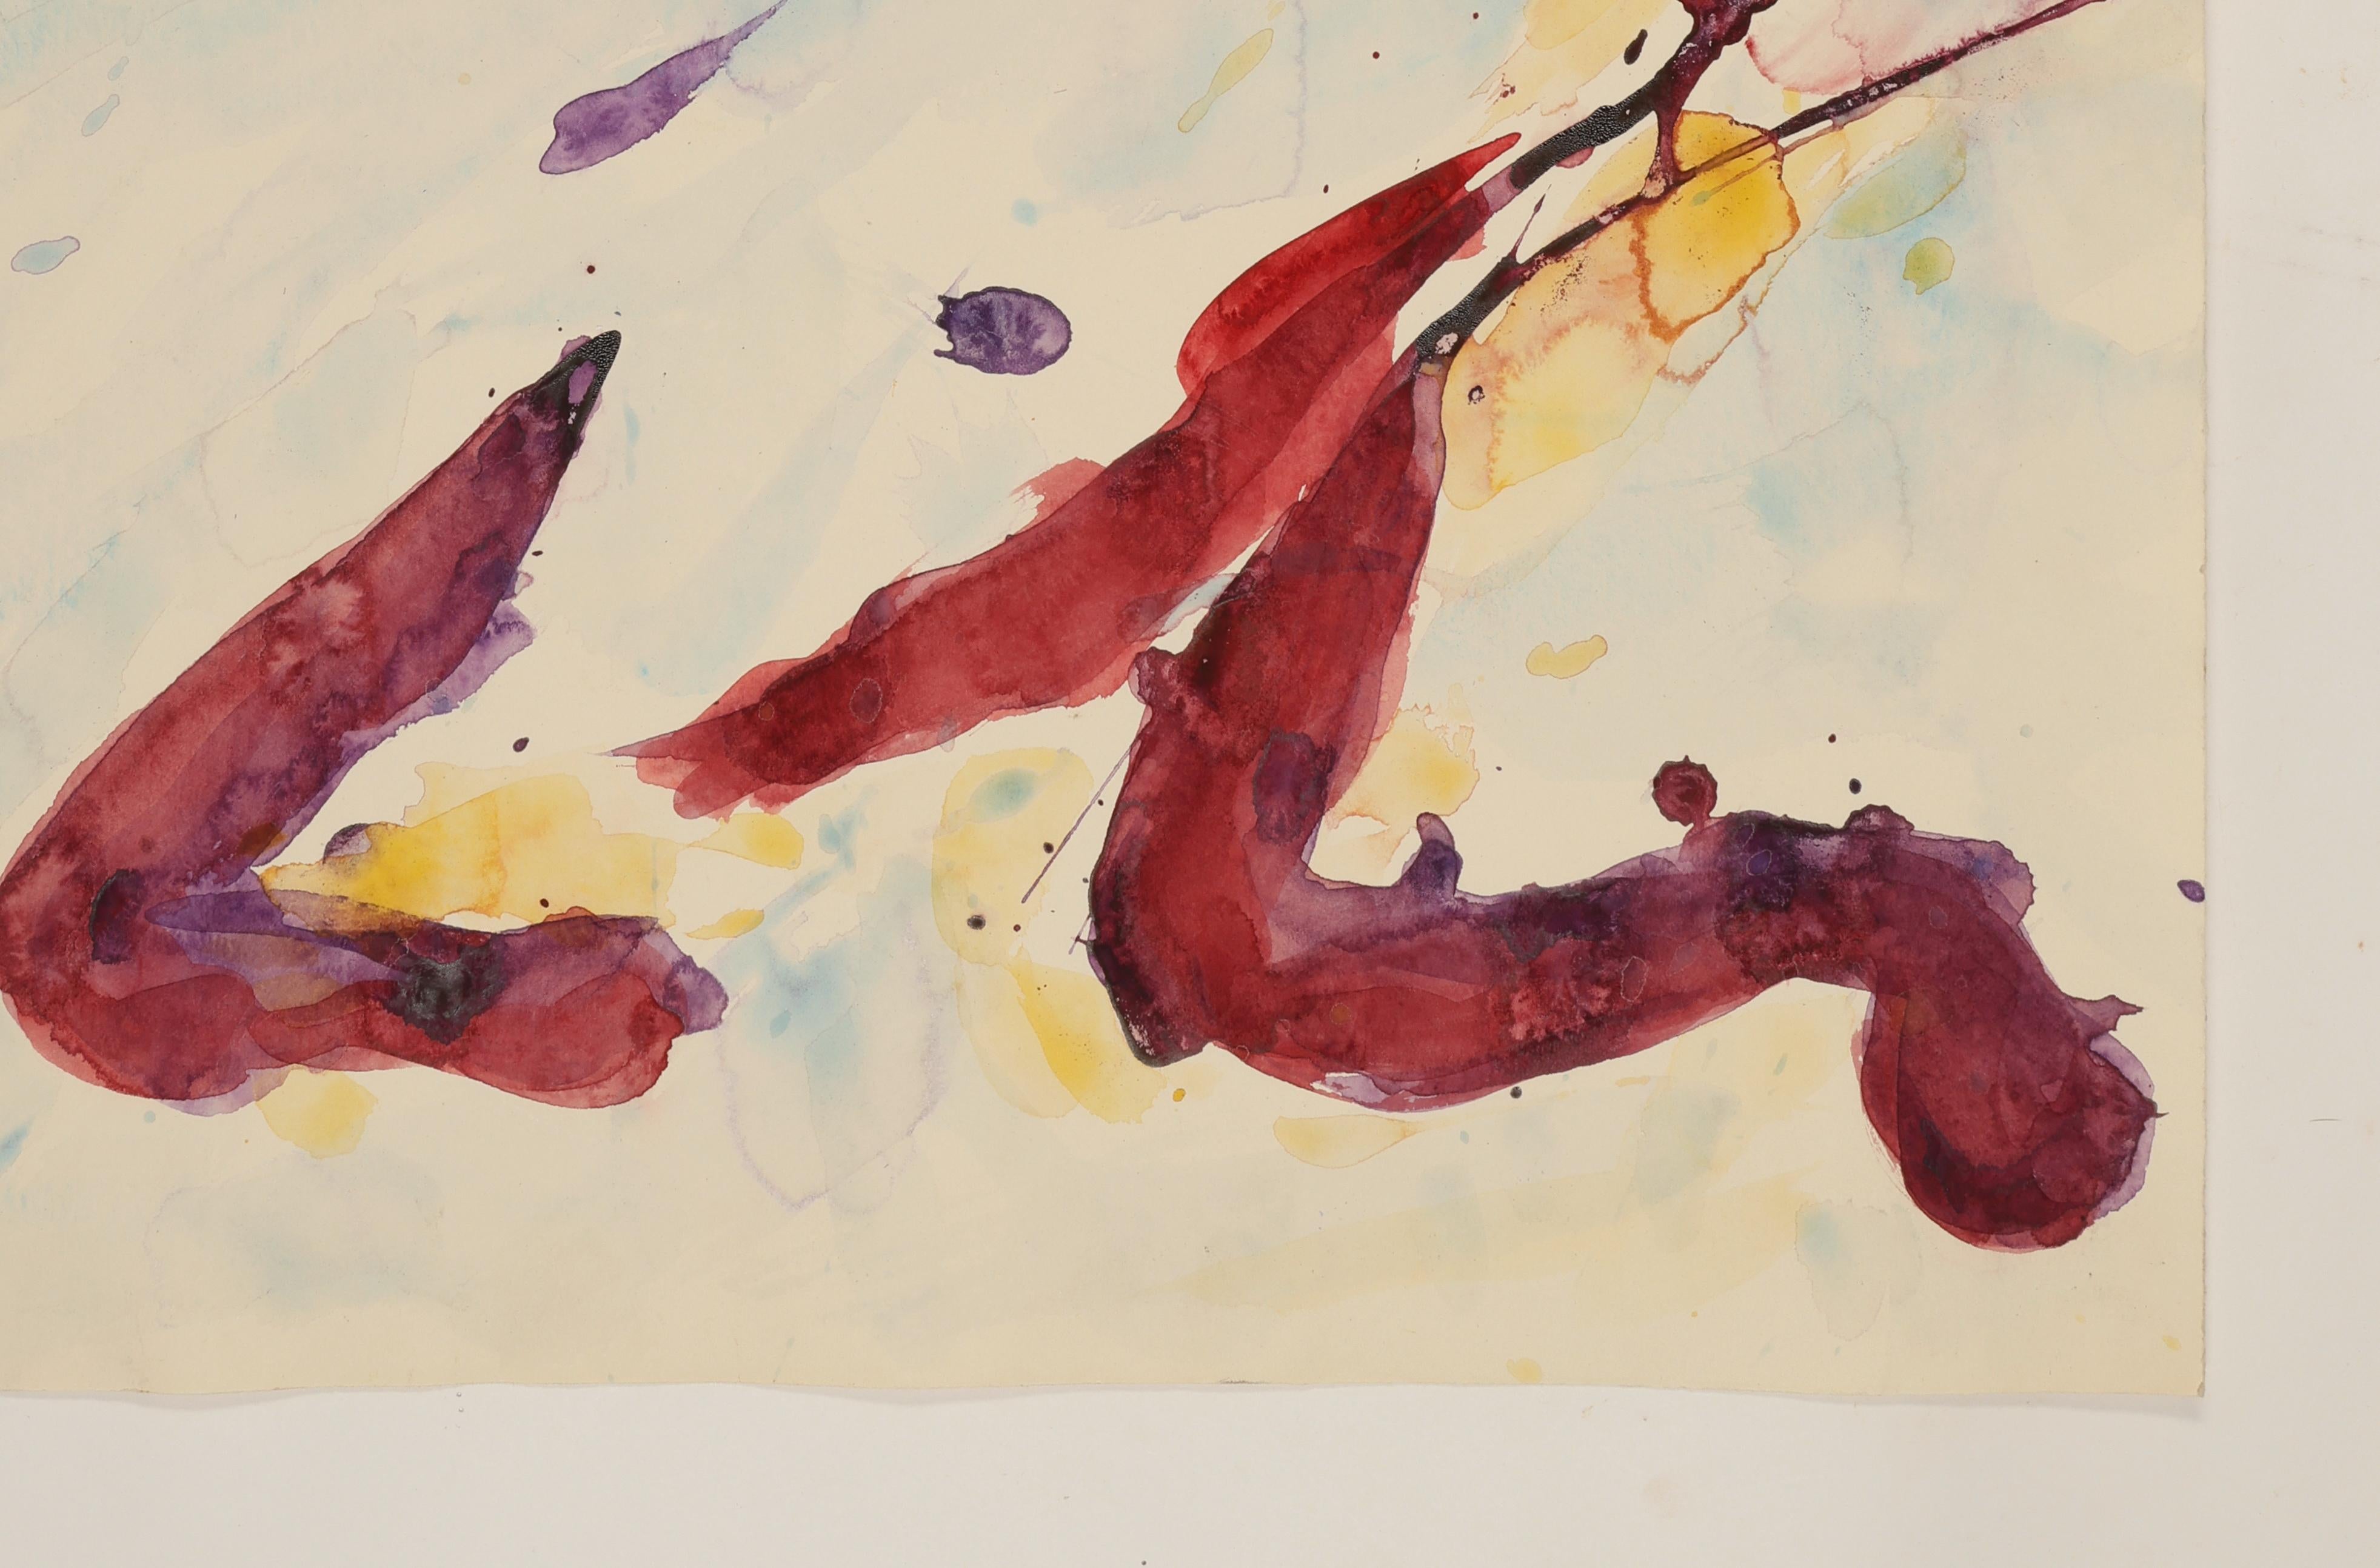 Abstract Watercolor Painting, 'Design for Sculpture', C. 2000 by David Ruth For Sale 1